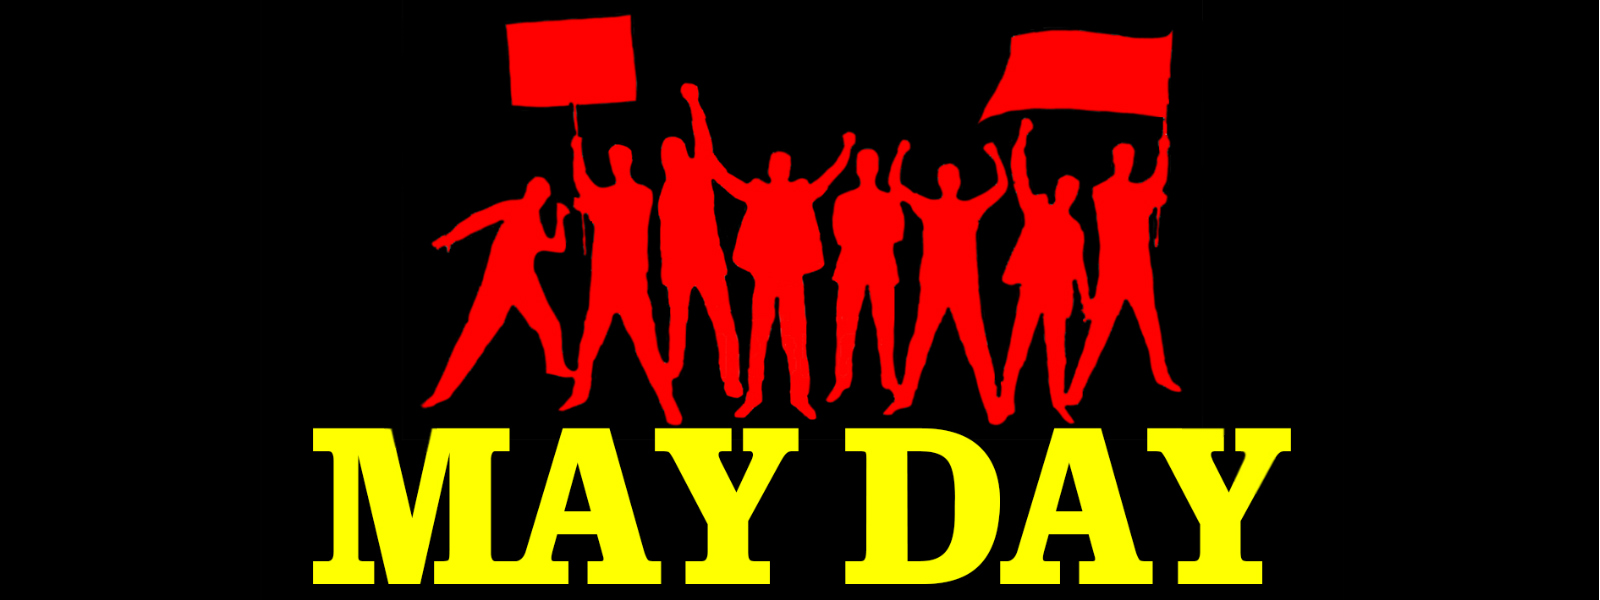 Gazette on May Day holiday to be issued